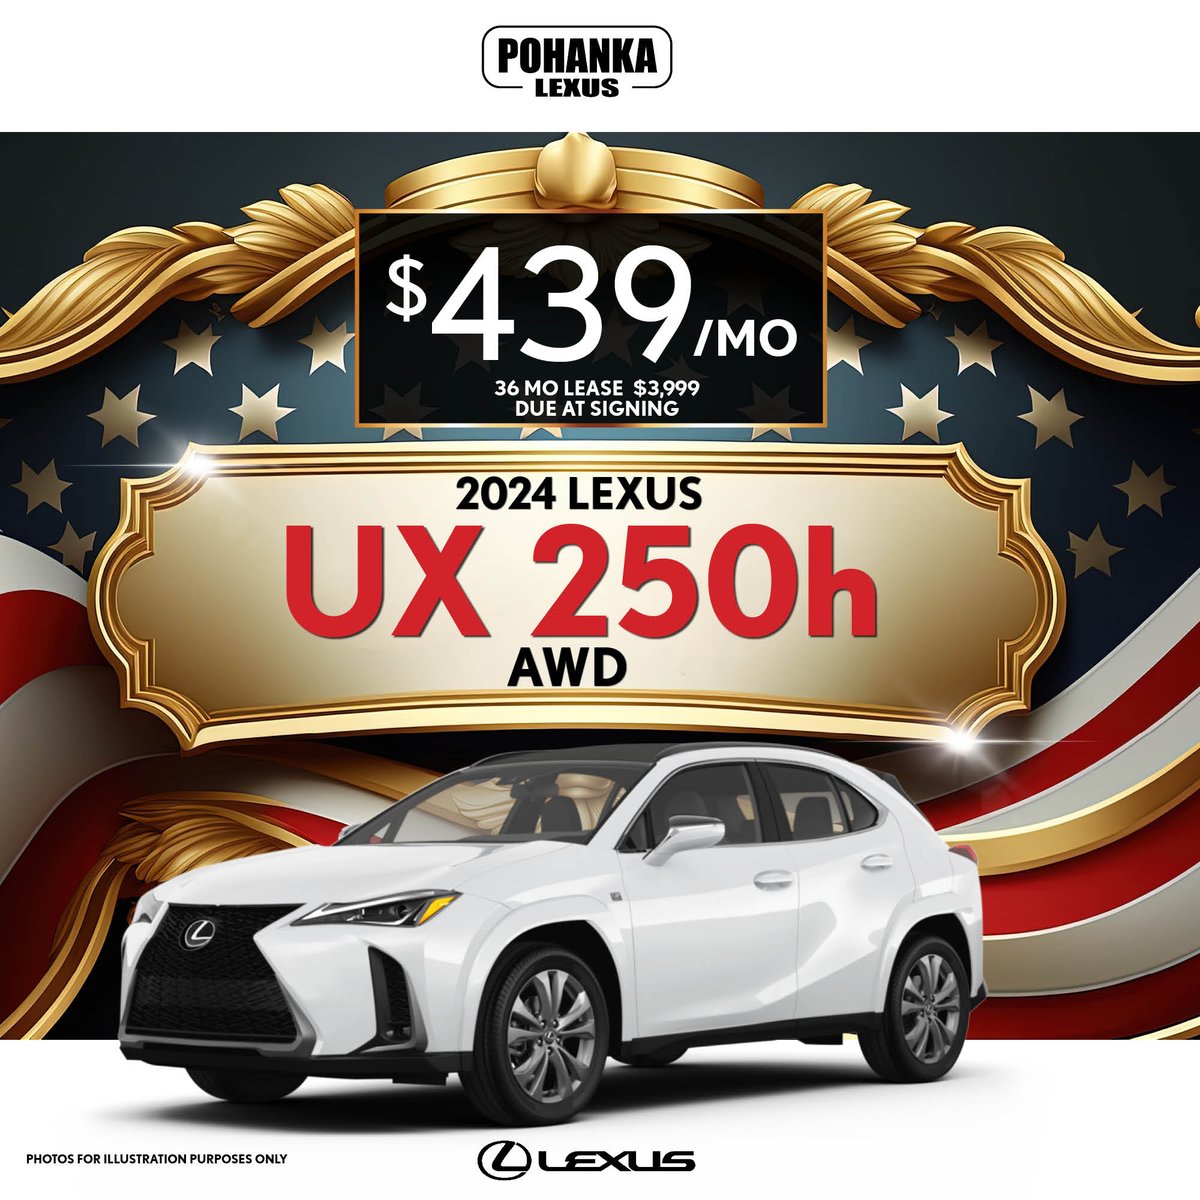 Find financing for $439 a month for a 36 months and only $3,999 due at signing on the 2024 Lexus UX 250 AWD!

Shop now: bit.ly/3xDxgqv

#ilovepohanka #pohankalexus #chantillyva #apr #upgrade